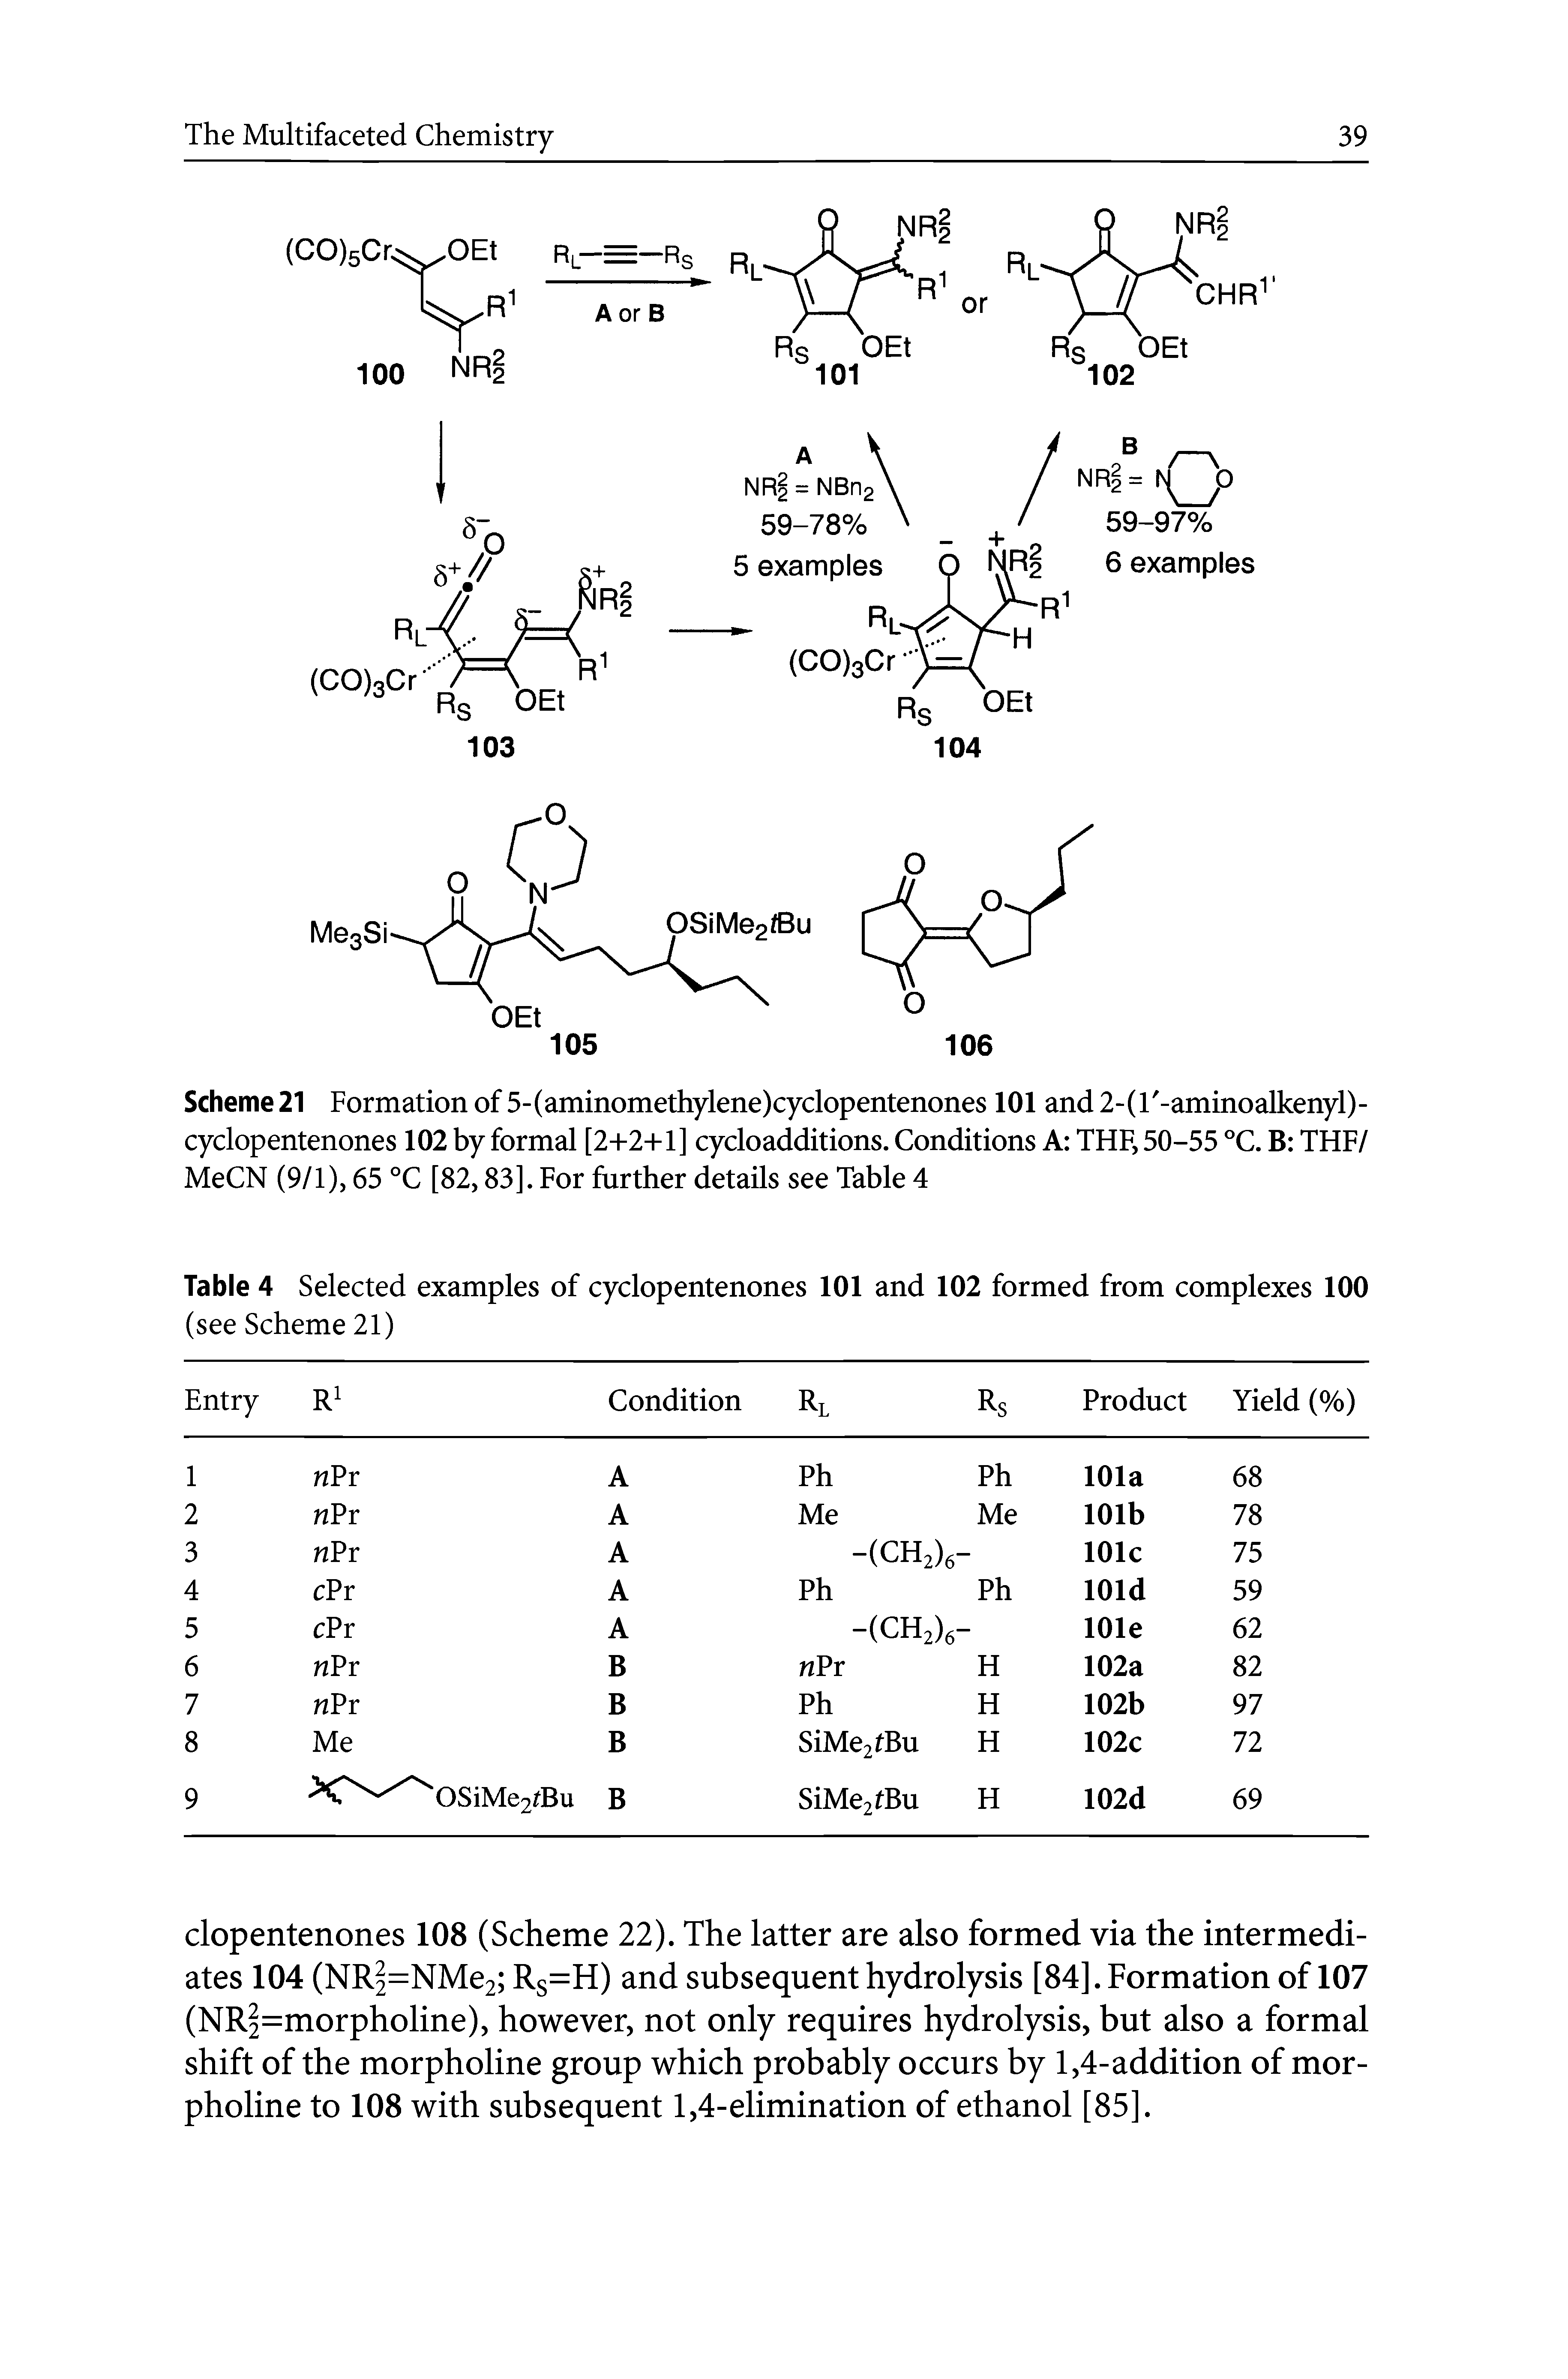 Scheme 21 Formation of 5-(aminomethylene)cyclopentenones 101 and 2-(r-aminoalkenyl)-cyclopentenones 102 by formal [2+2+1] cycloadditions. Conditions A THF, 50-55 °C. B THF/ MeCN (9/1), 65 °C [82,83]. For further details see Table 4...